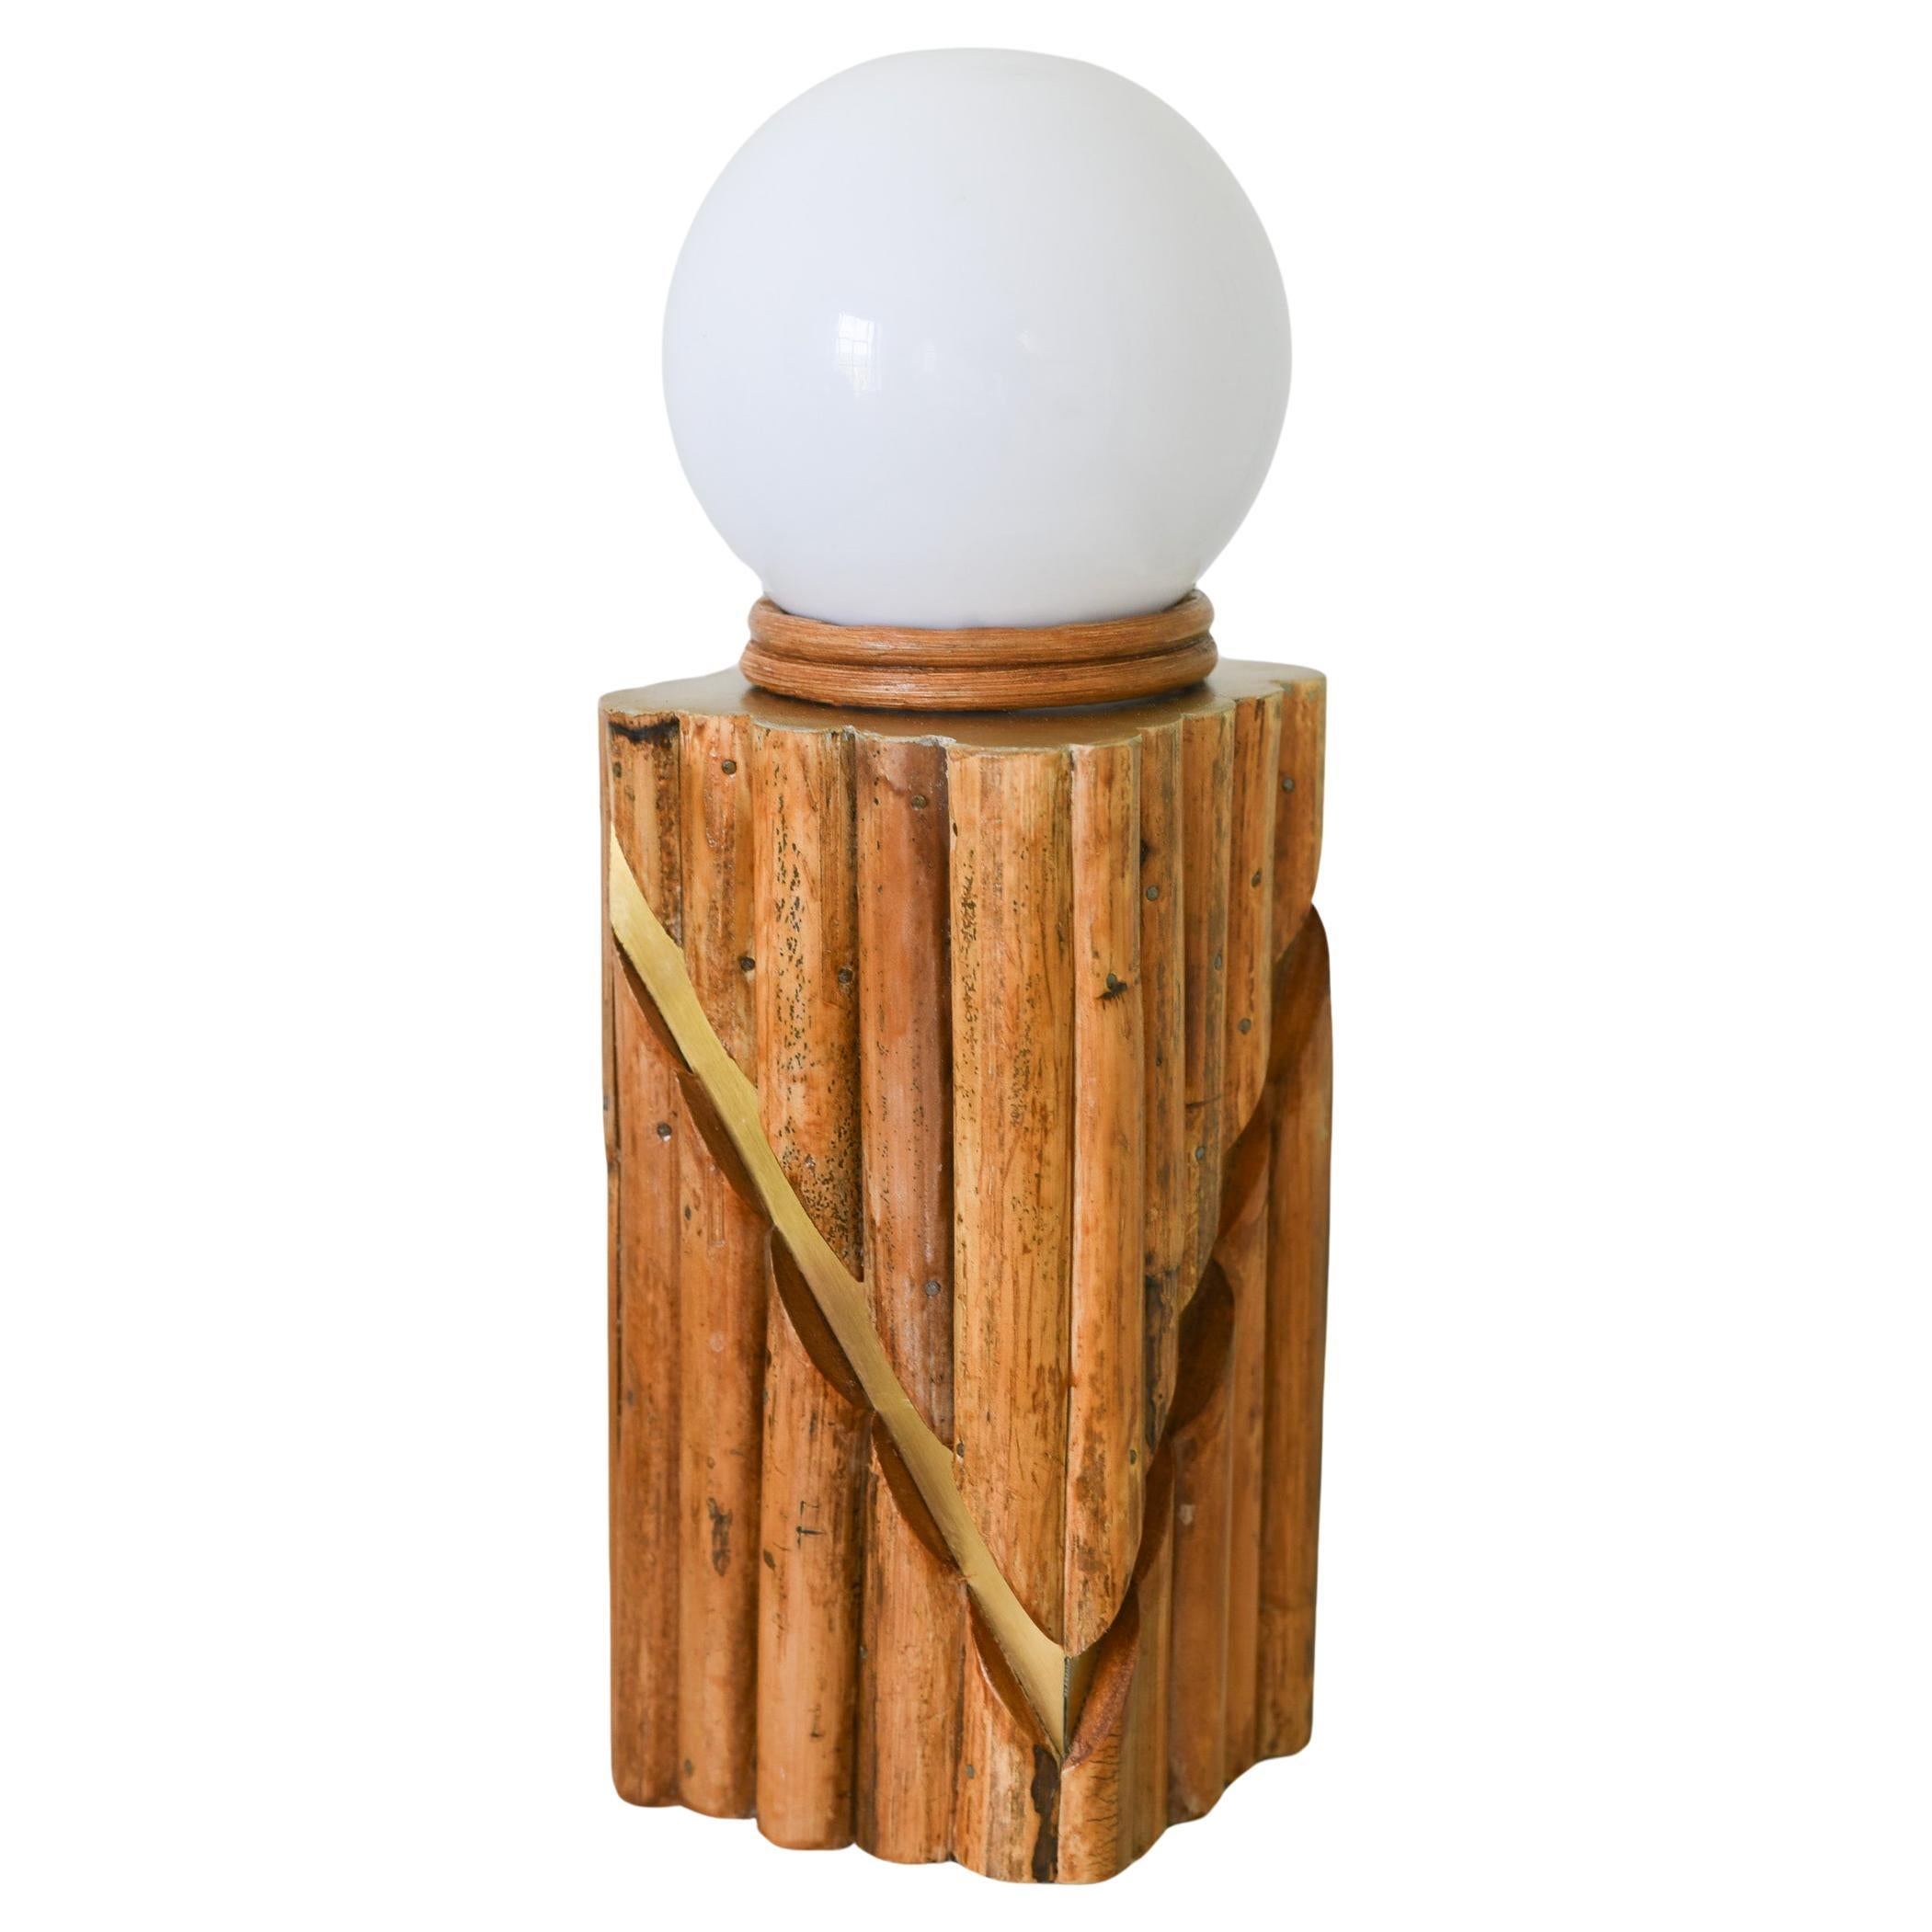 Rattan Table Lamp with Domed Shade Midcentury Modern